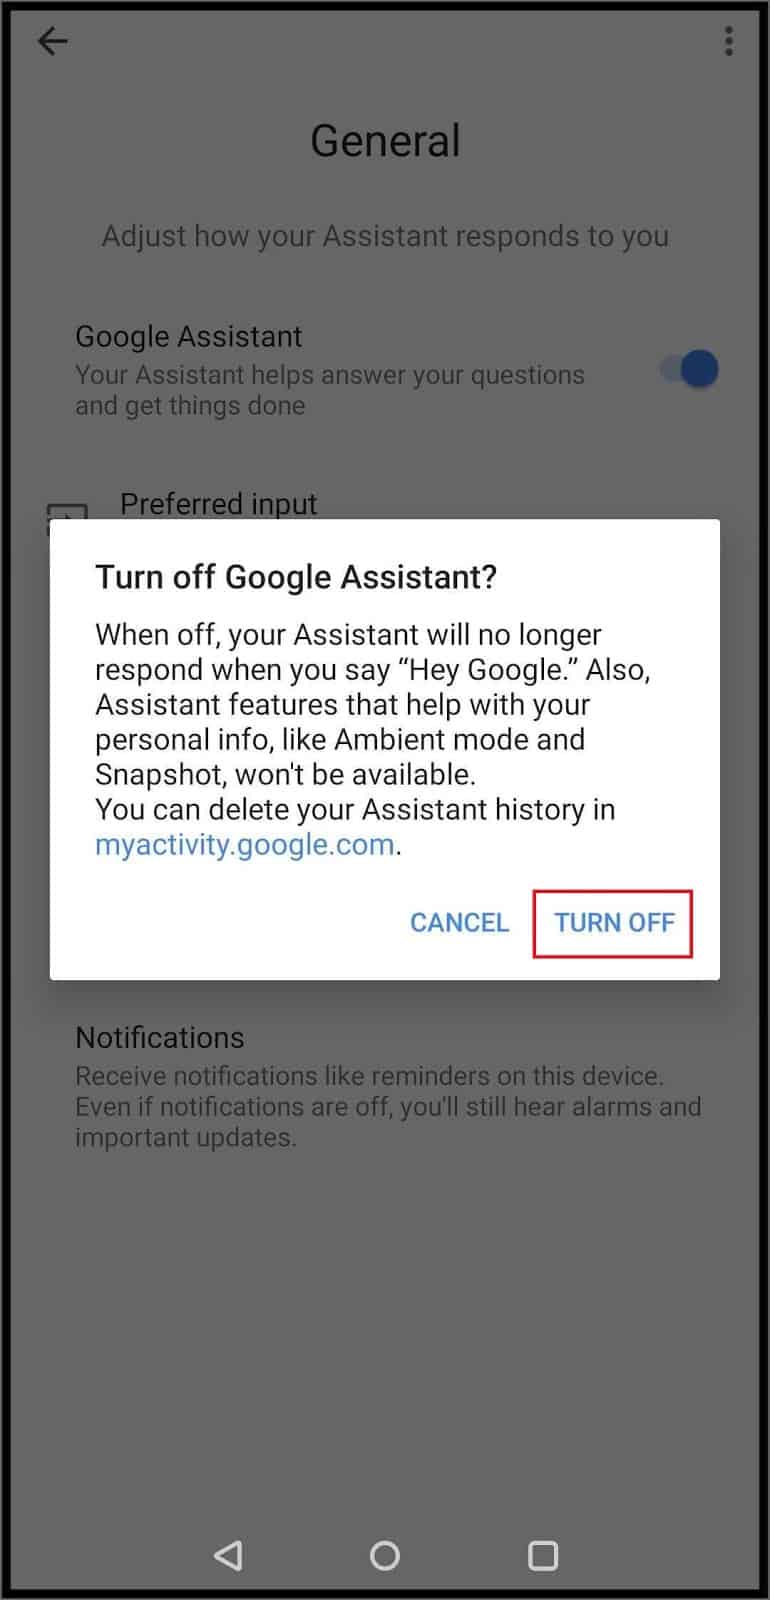  Confirm turning off Google Assistant